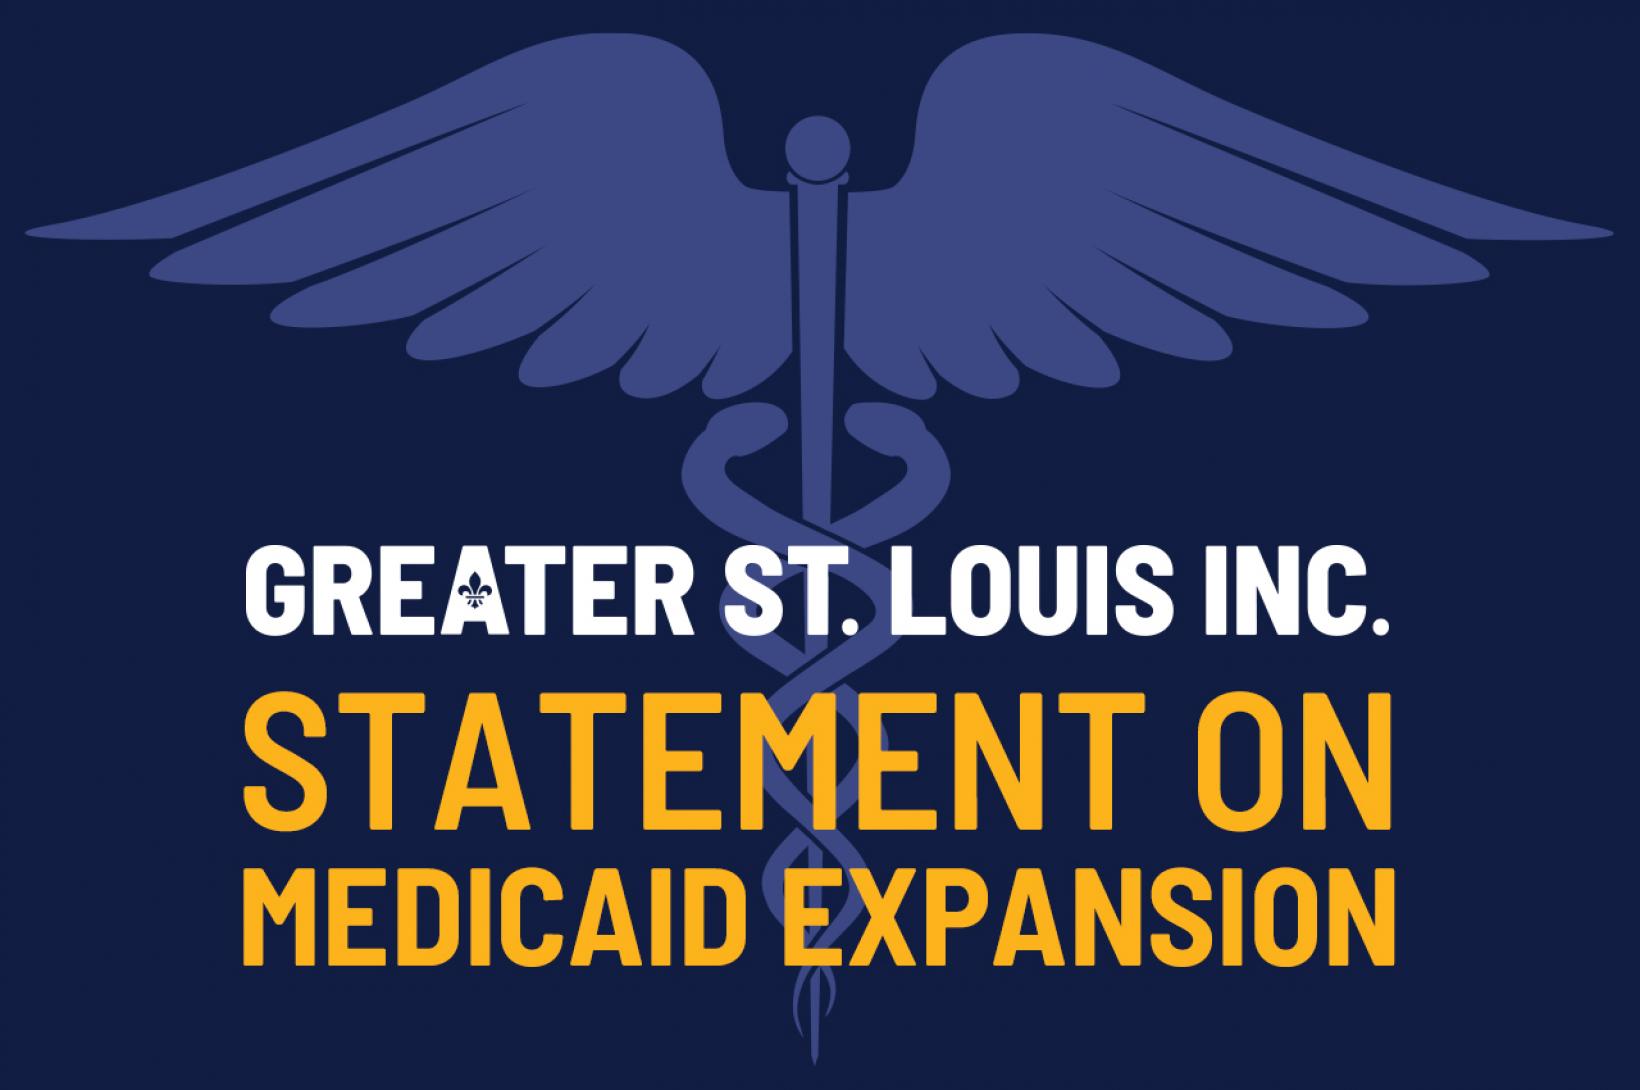 GSL Inc. Statement on Medicaid Expansion